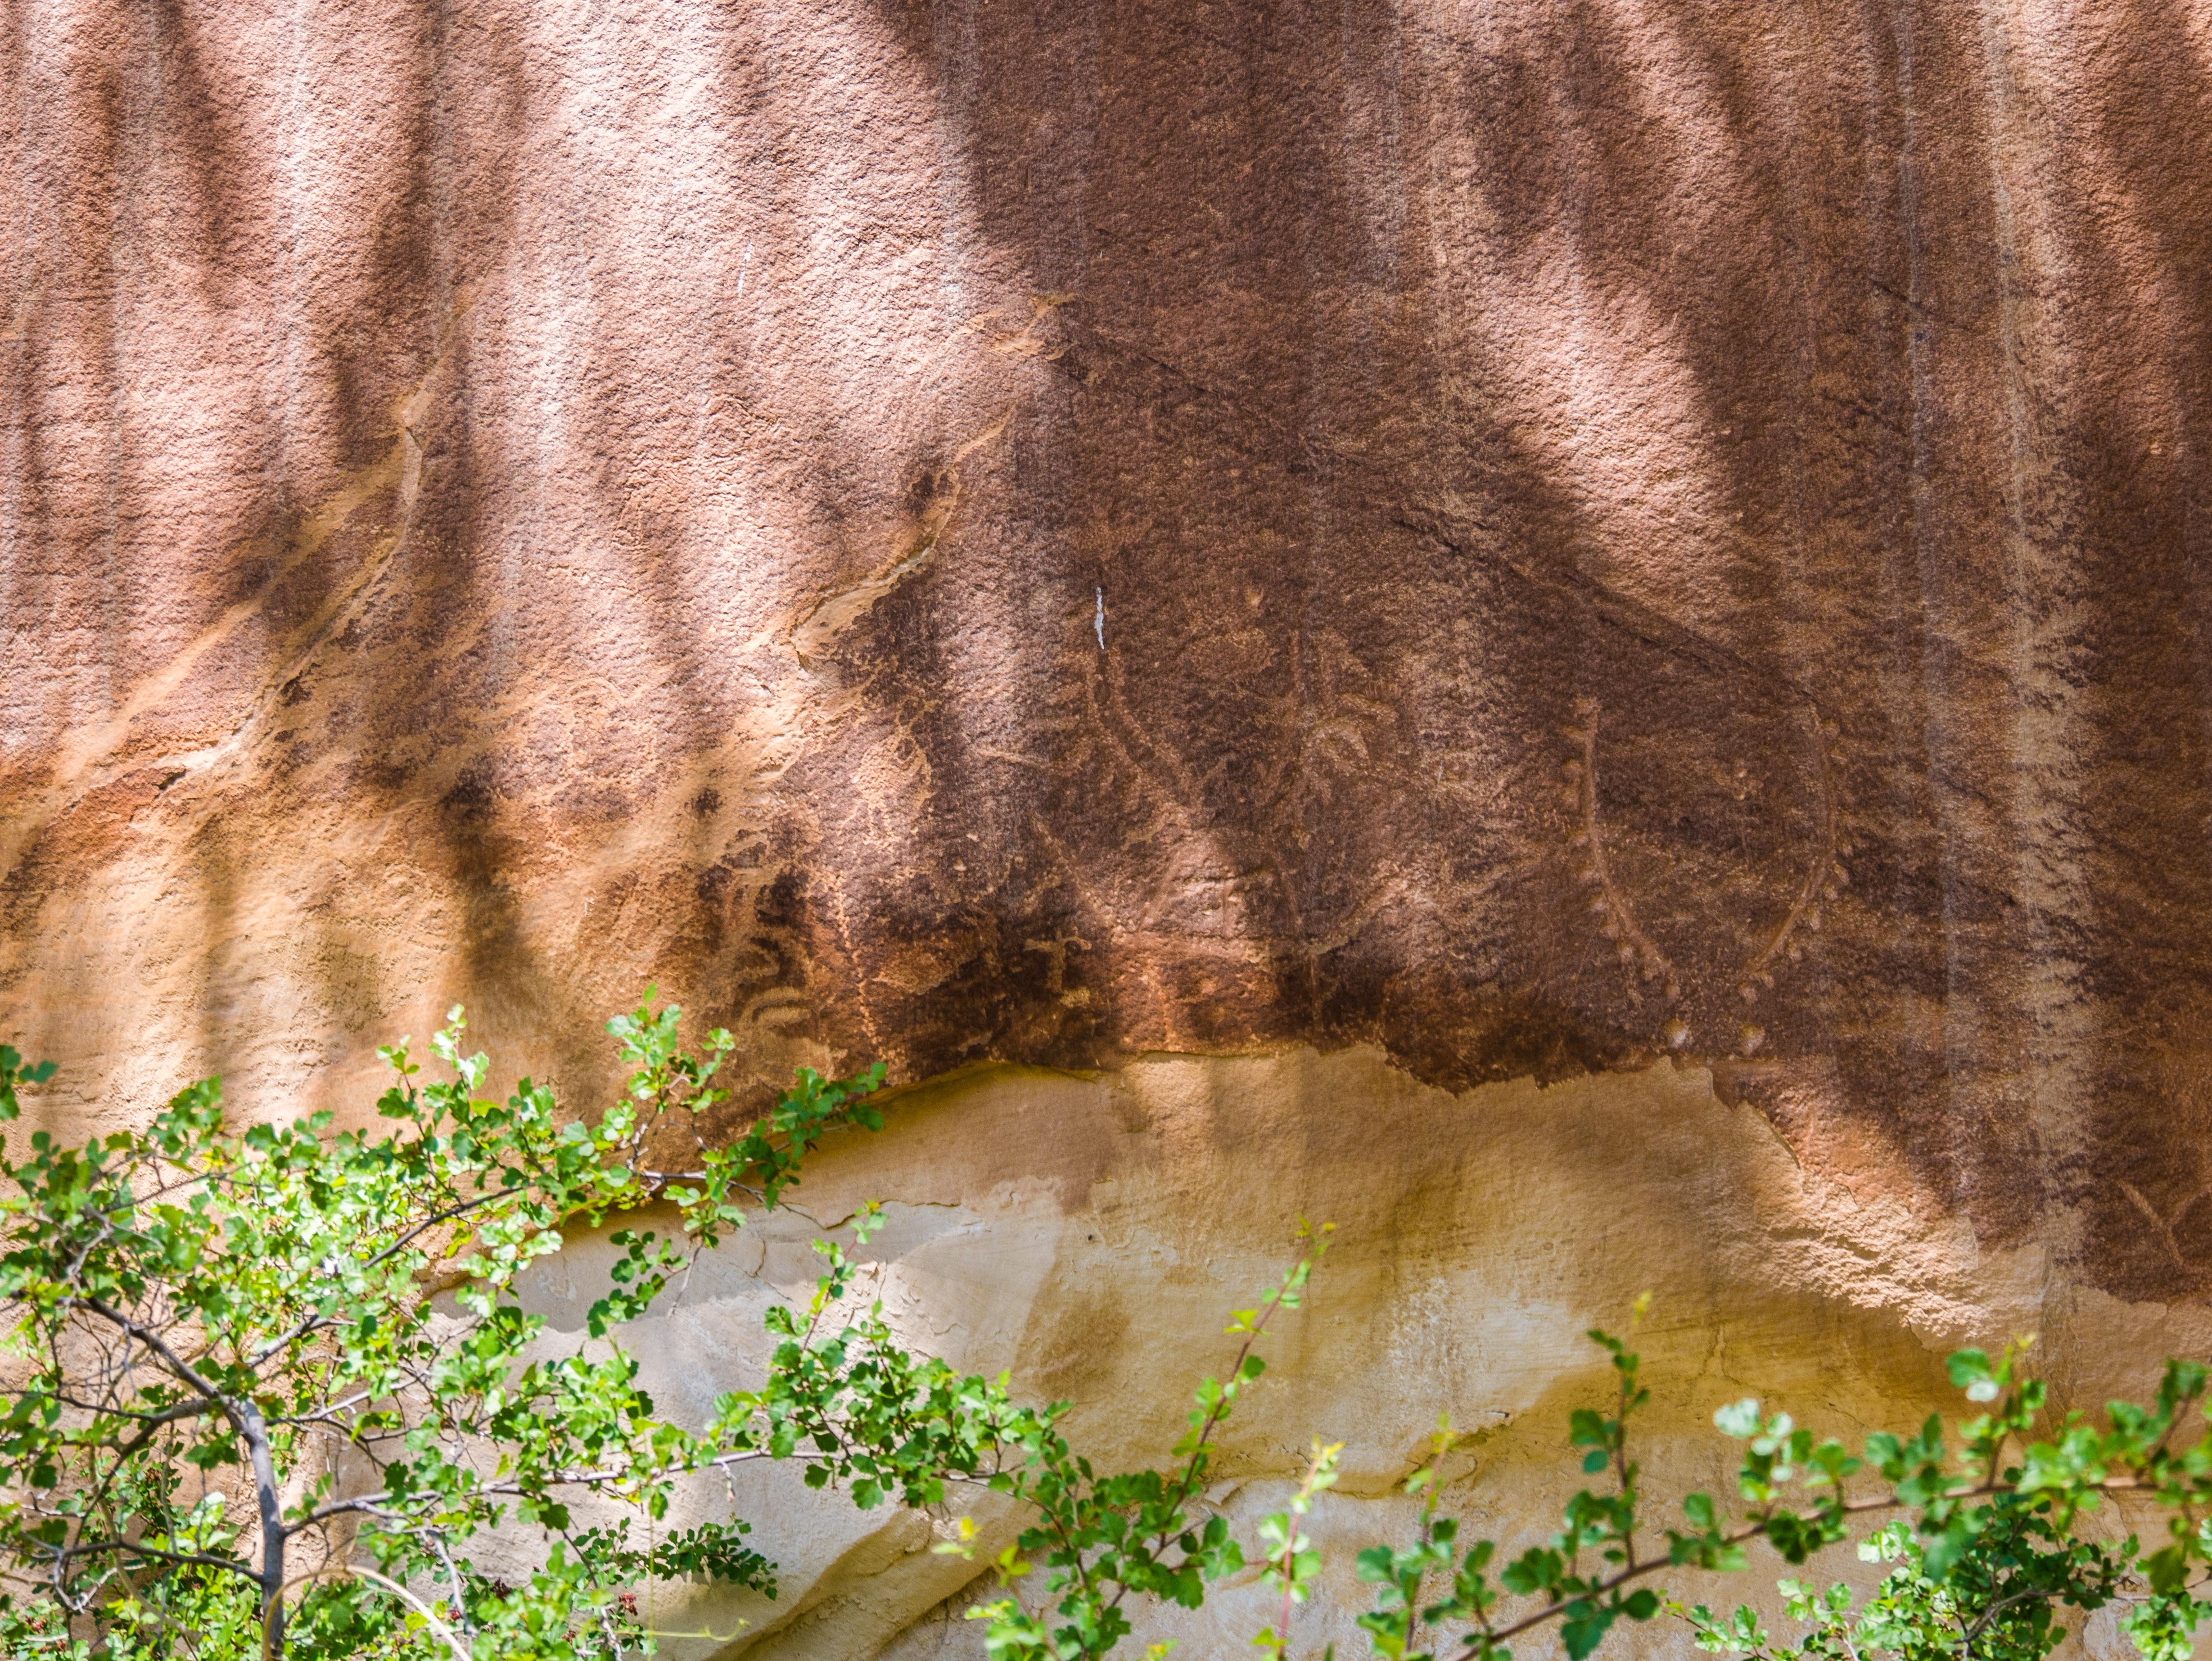 Some of the Fremont Culture Petroglyphs at Capitol Reef National Park